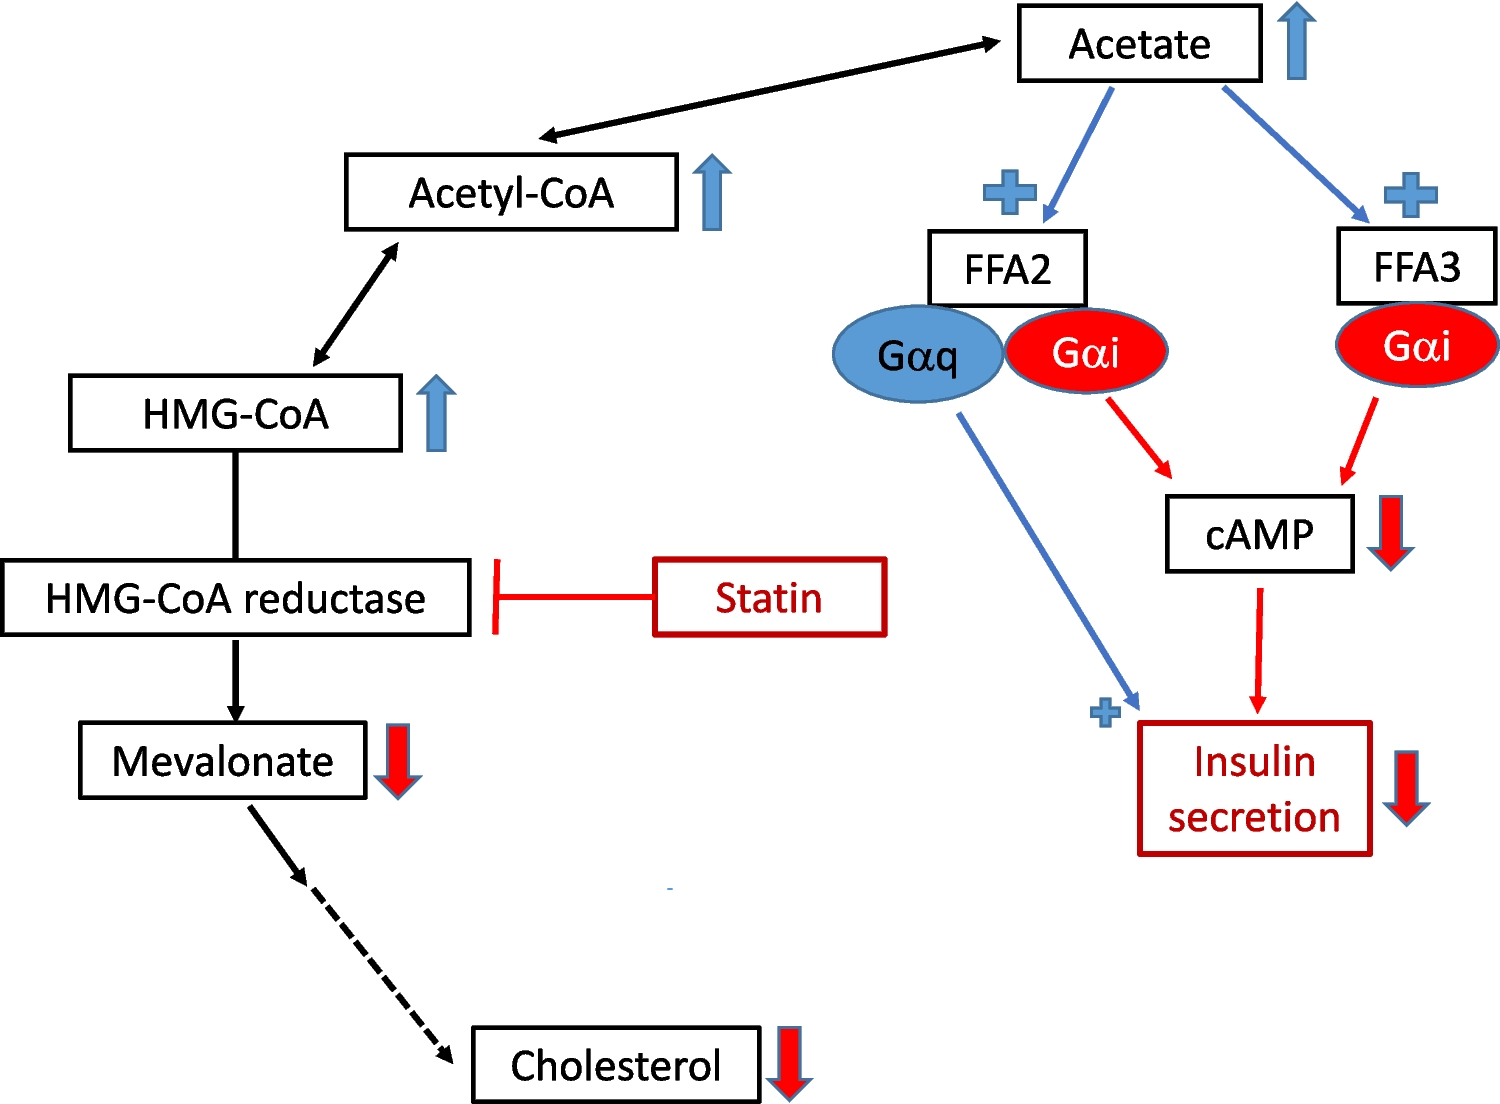 Can acetate via FFA receptors contribute to the diabetogenic effect of statins?